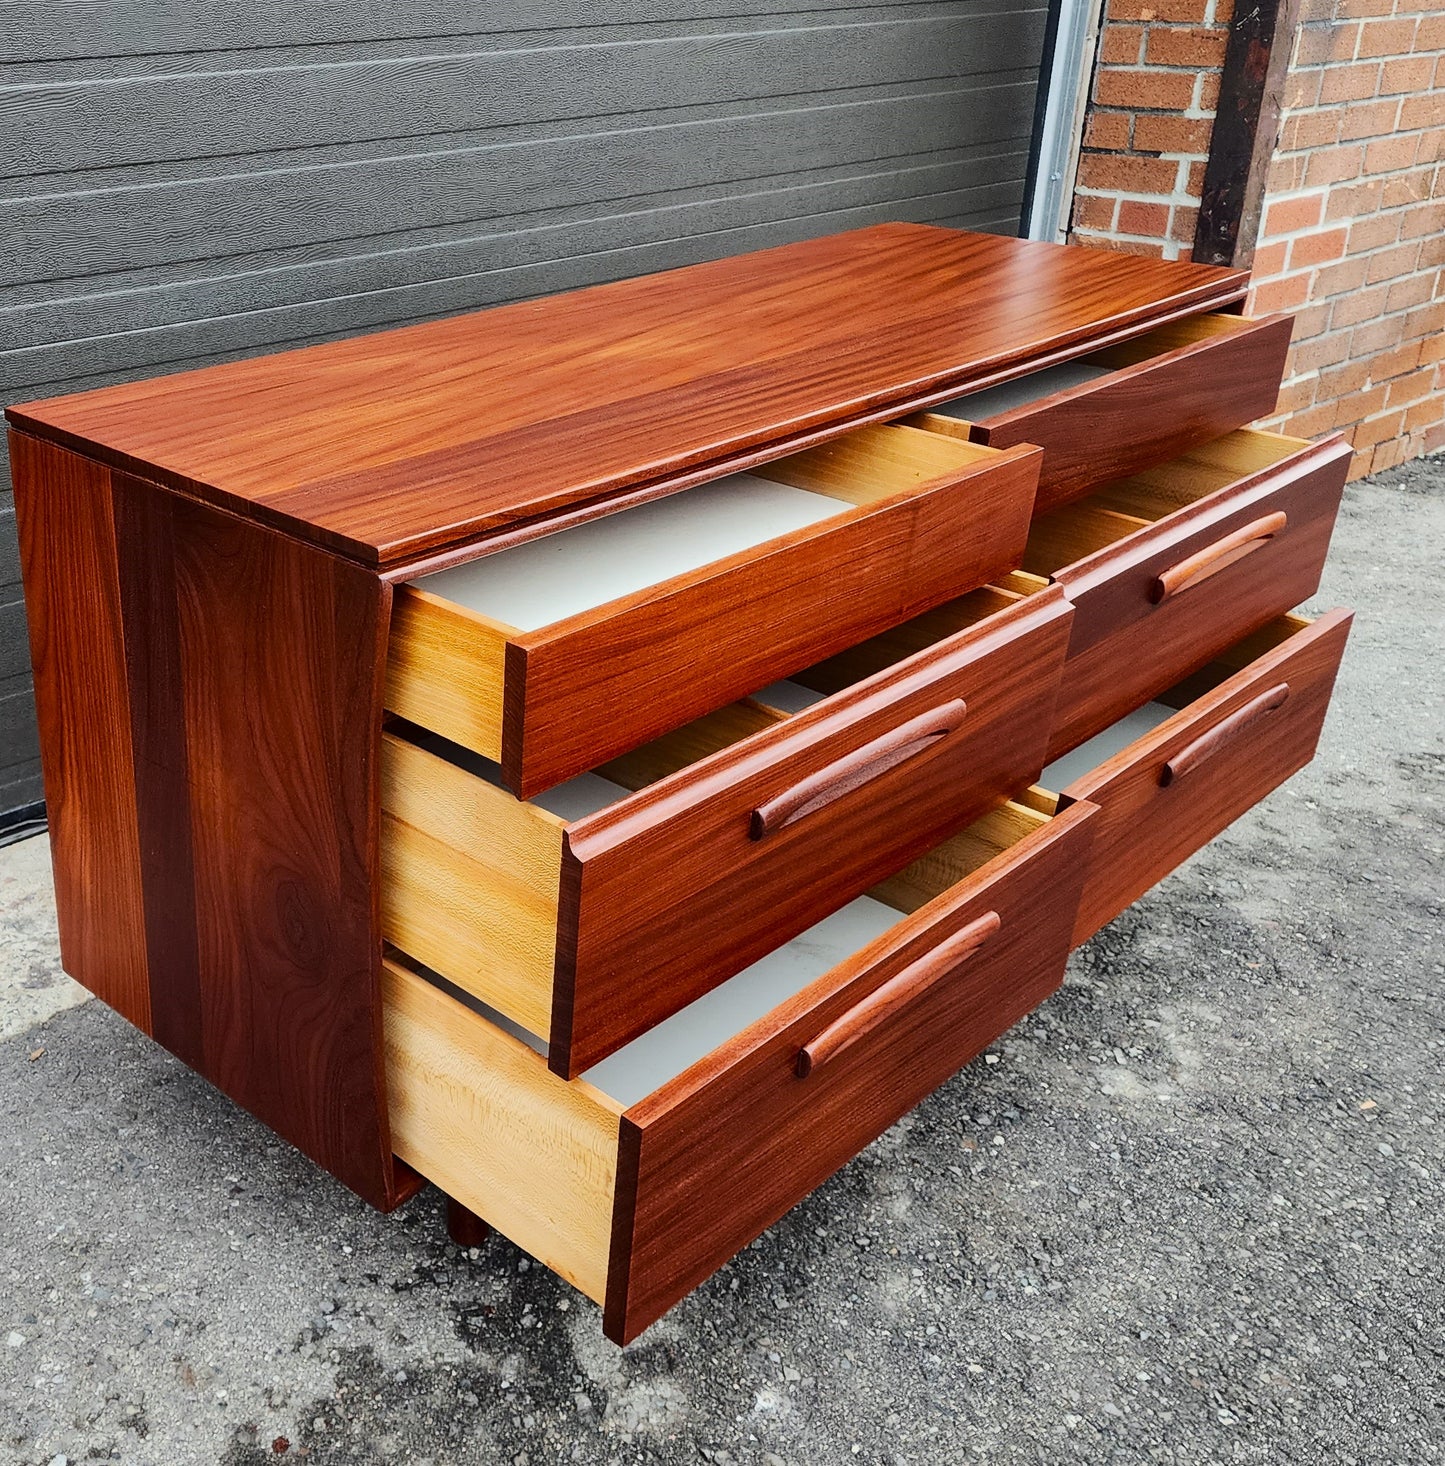 REFINISHED Mid Century Modern SOLID TEAK Afromosia Dresser by Imperial